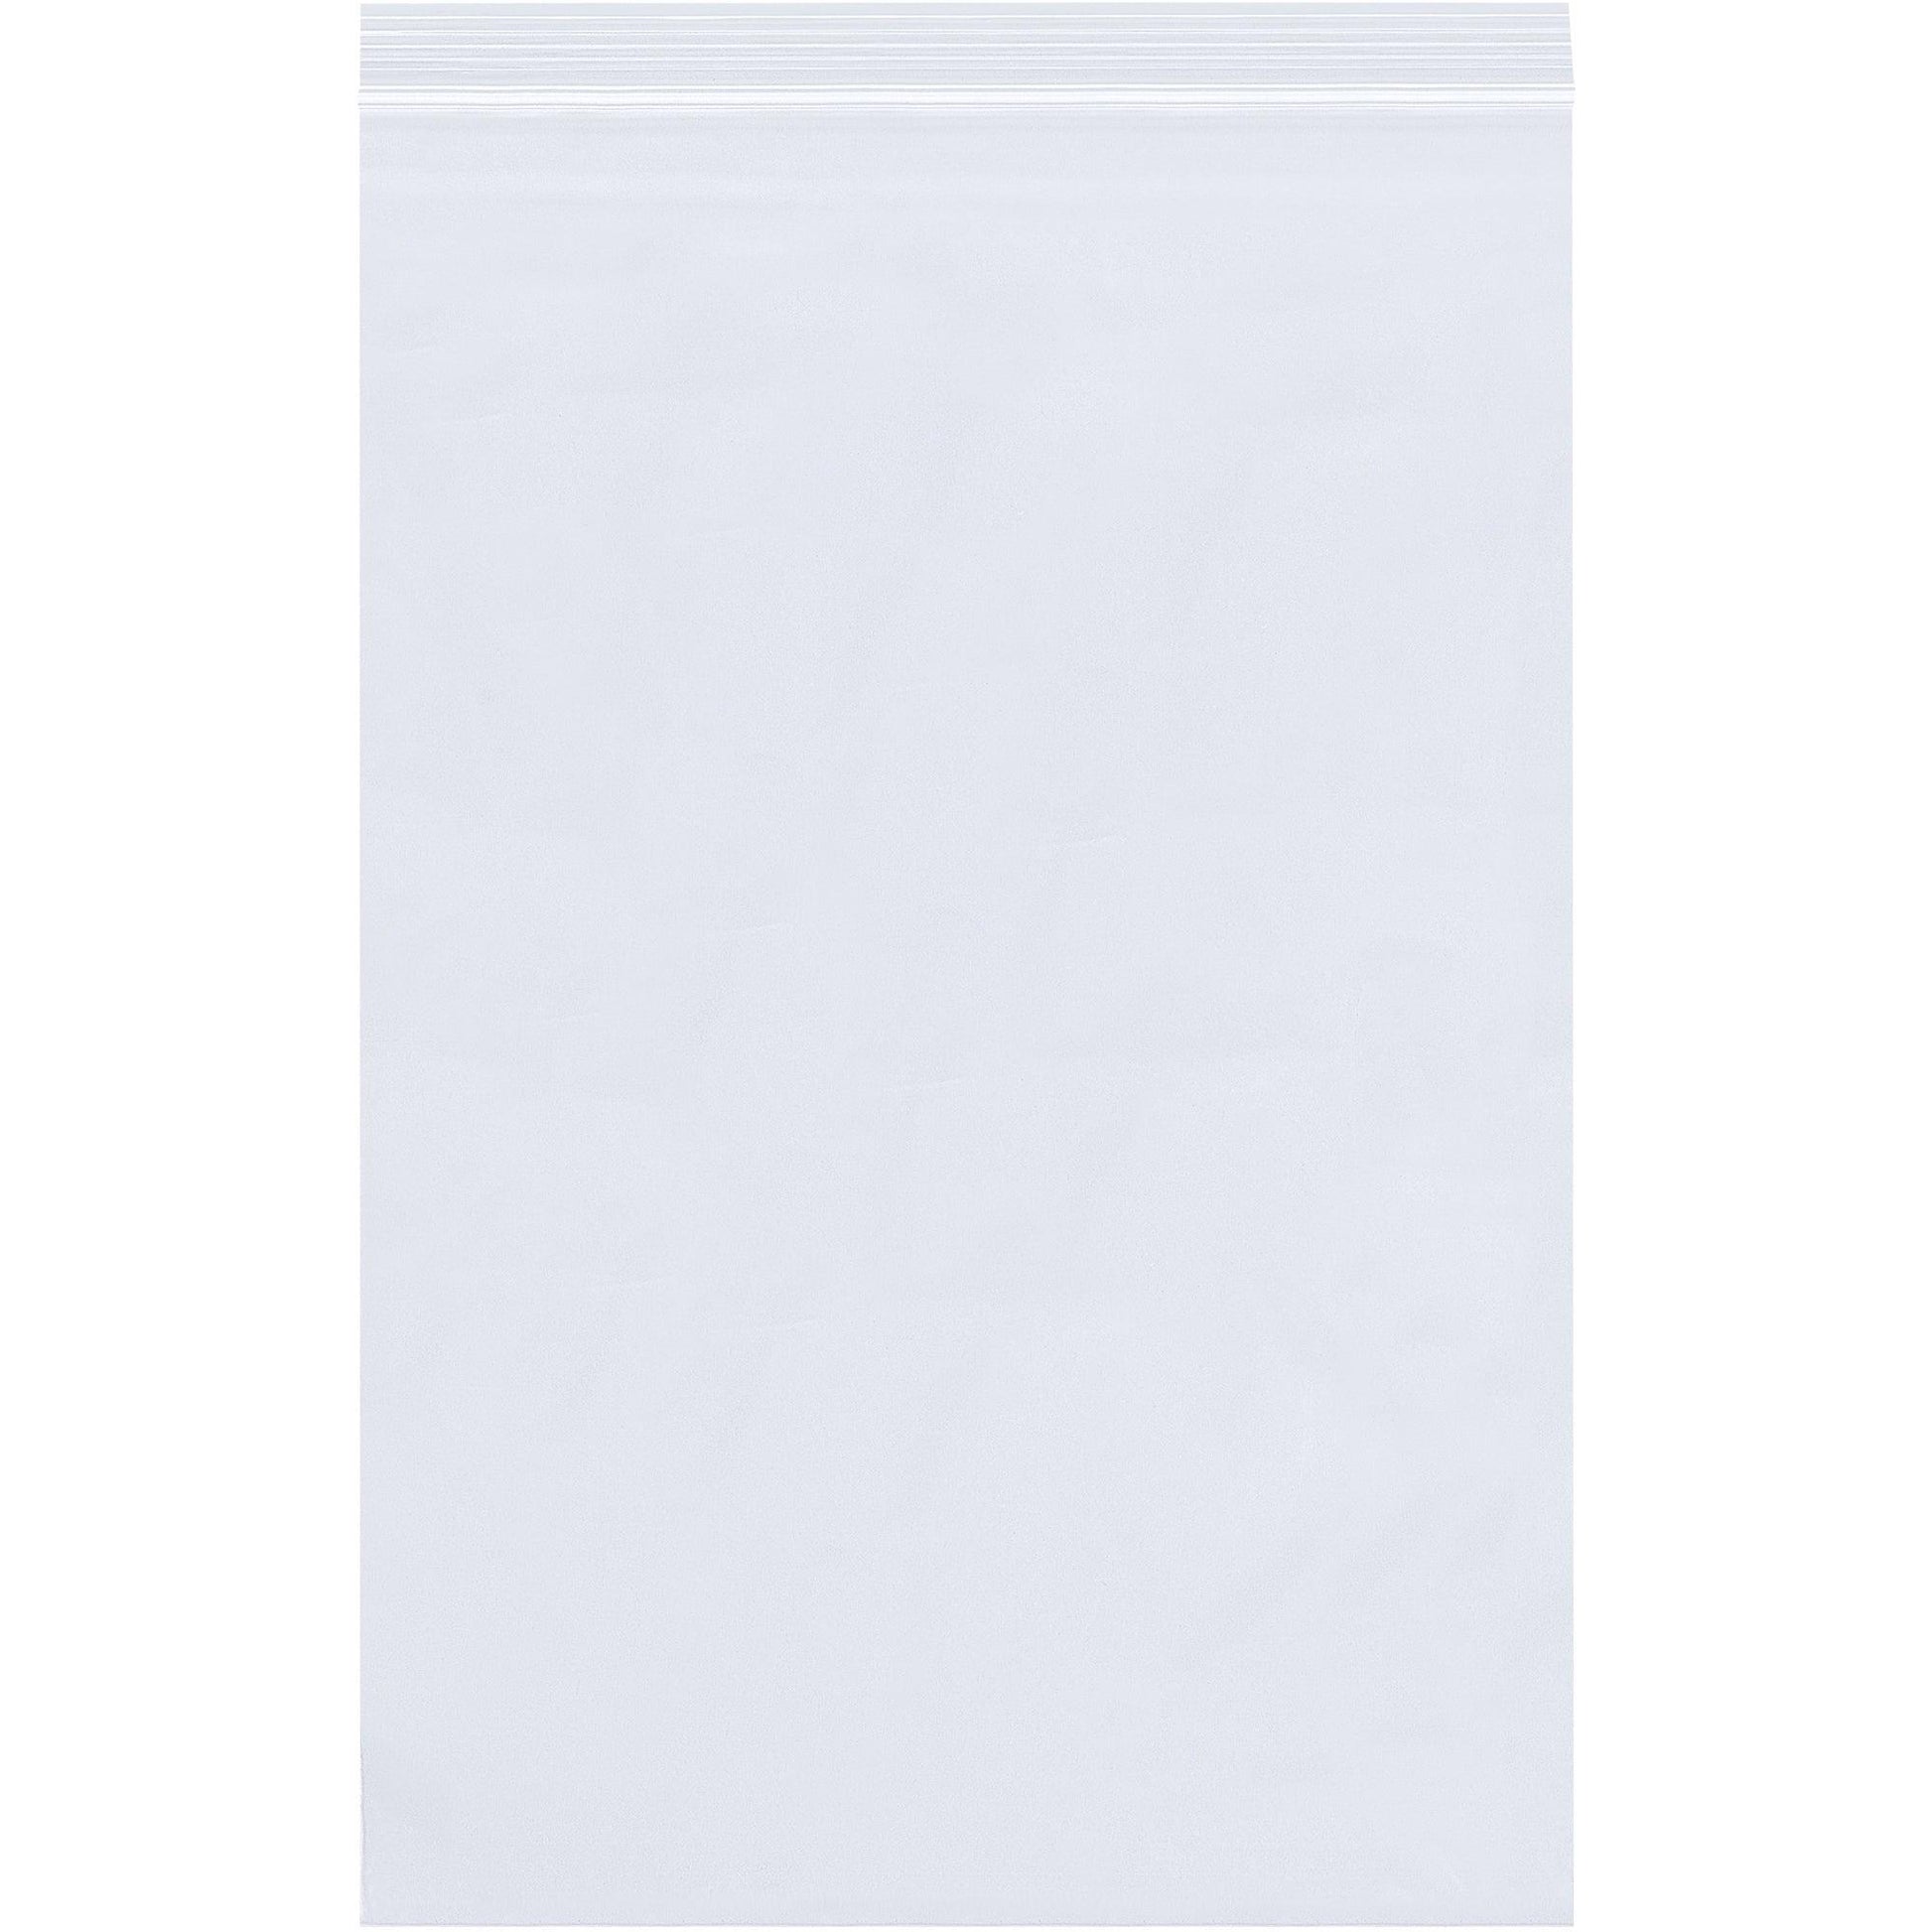 4 x 6" - 4 Mil Reclosable Poly Bags - PB3710